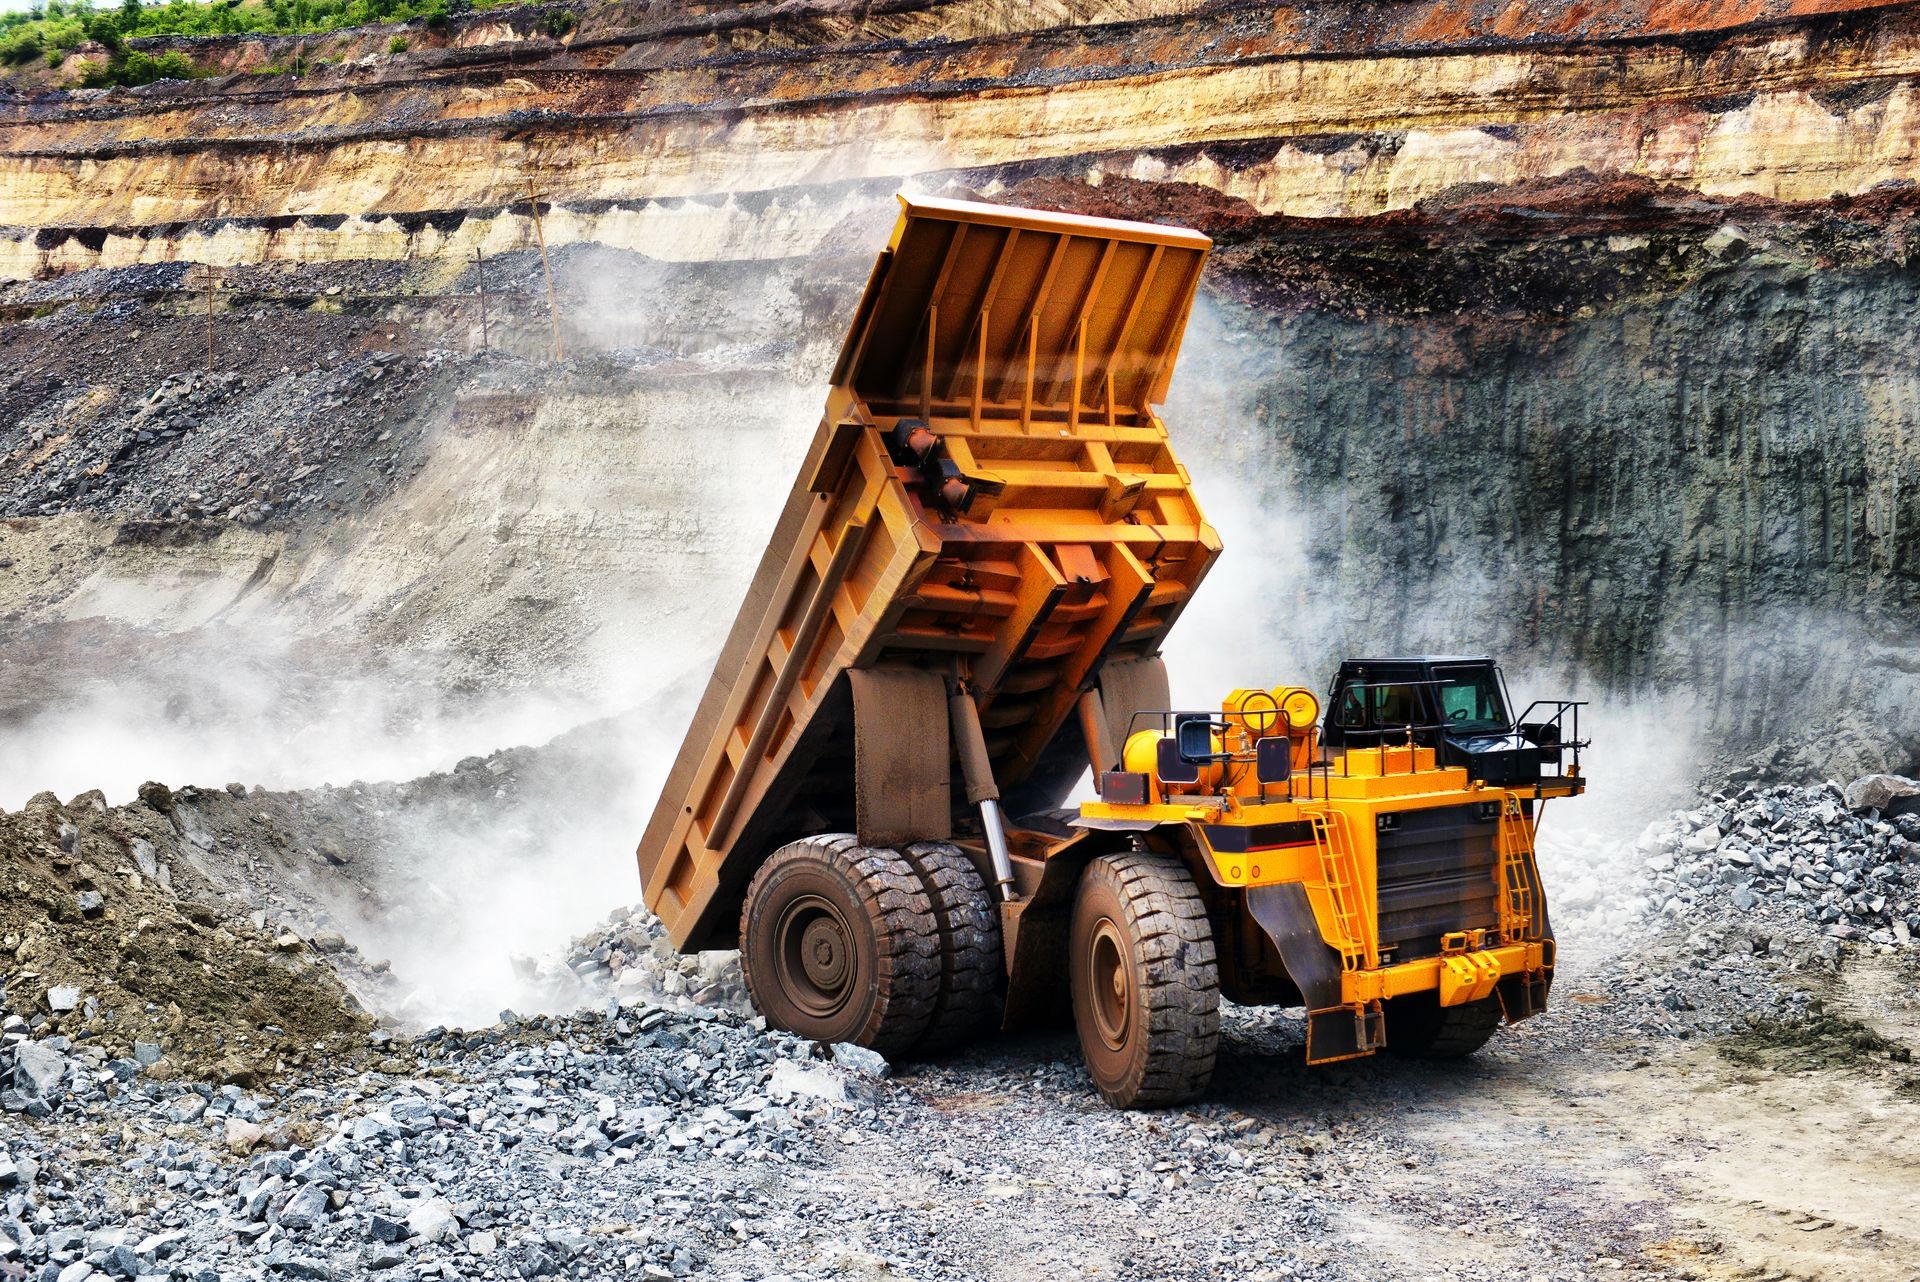 large mining loader unloads extracted ore or rock. View from the back. Mining concept